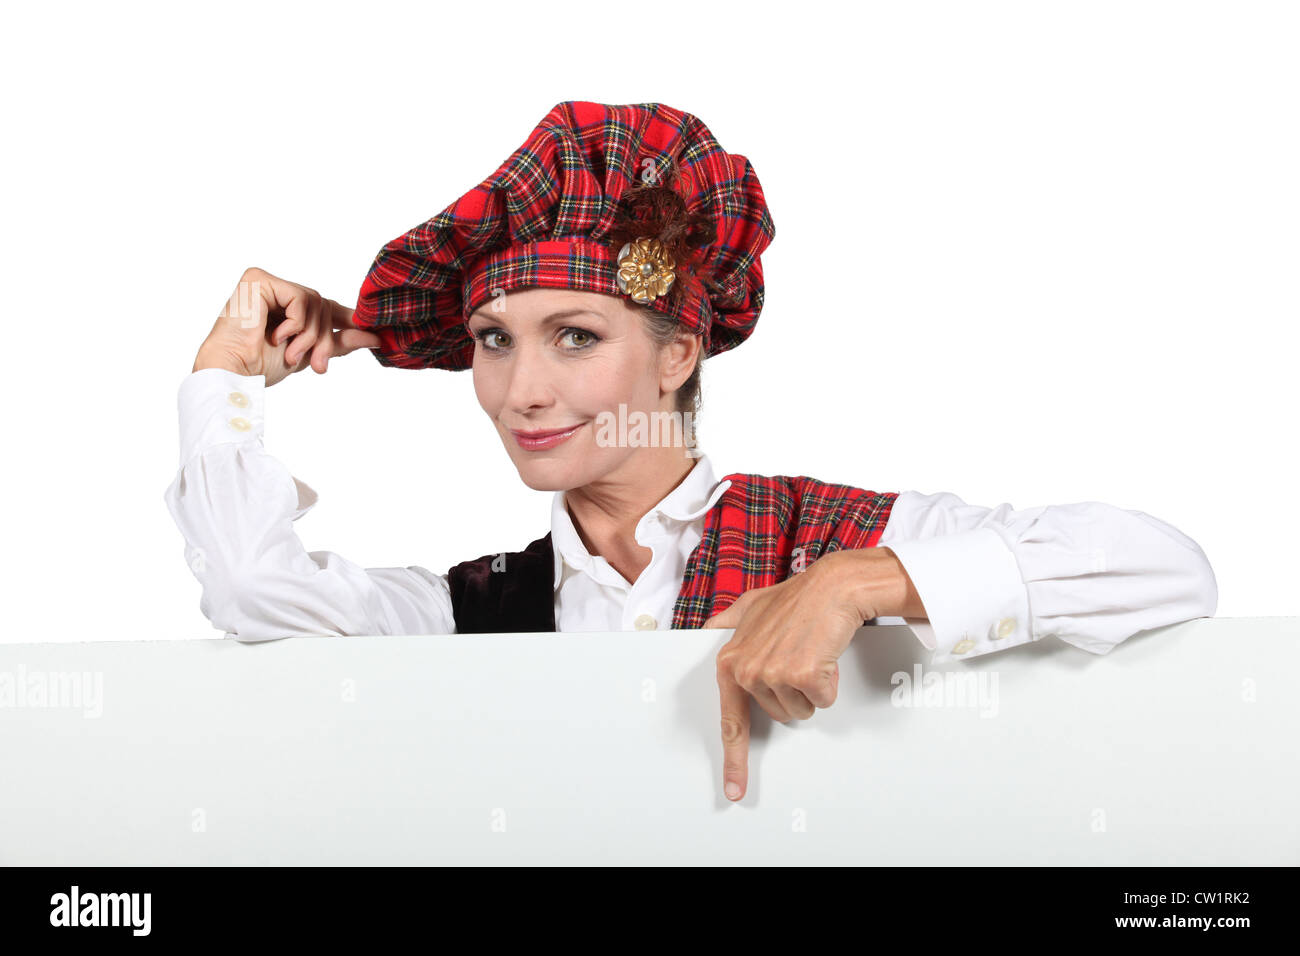 Scottish woman in traditional costume Stock Photo